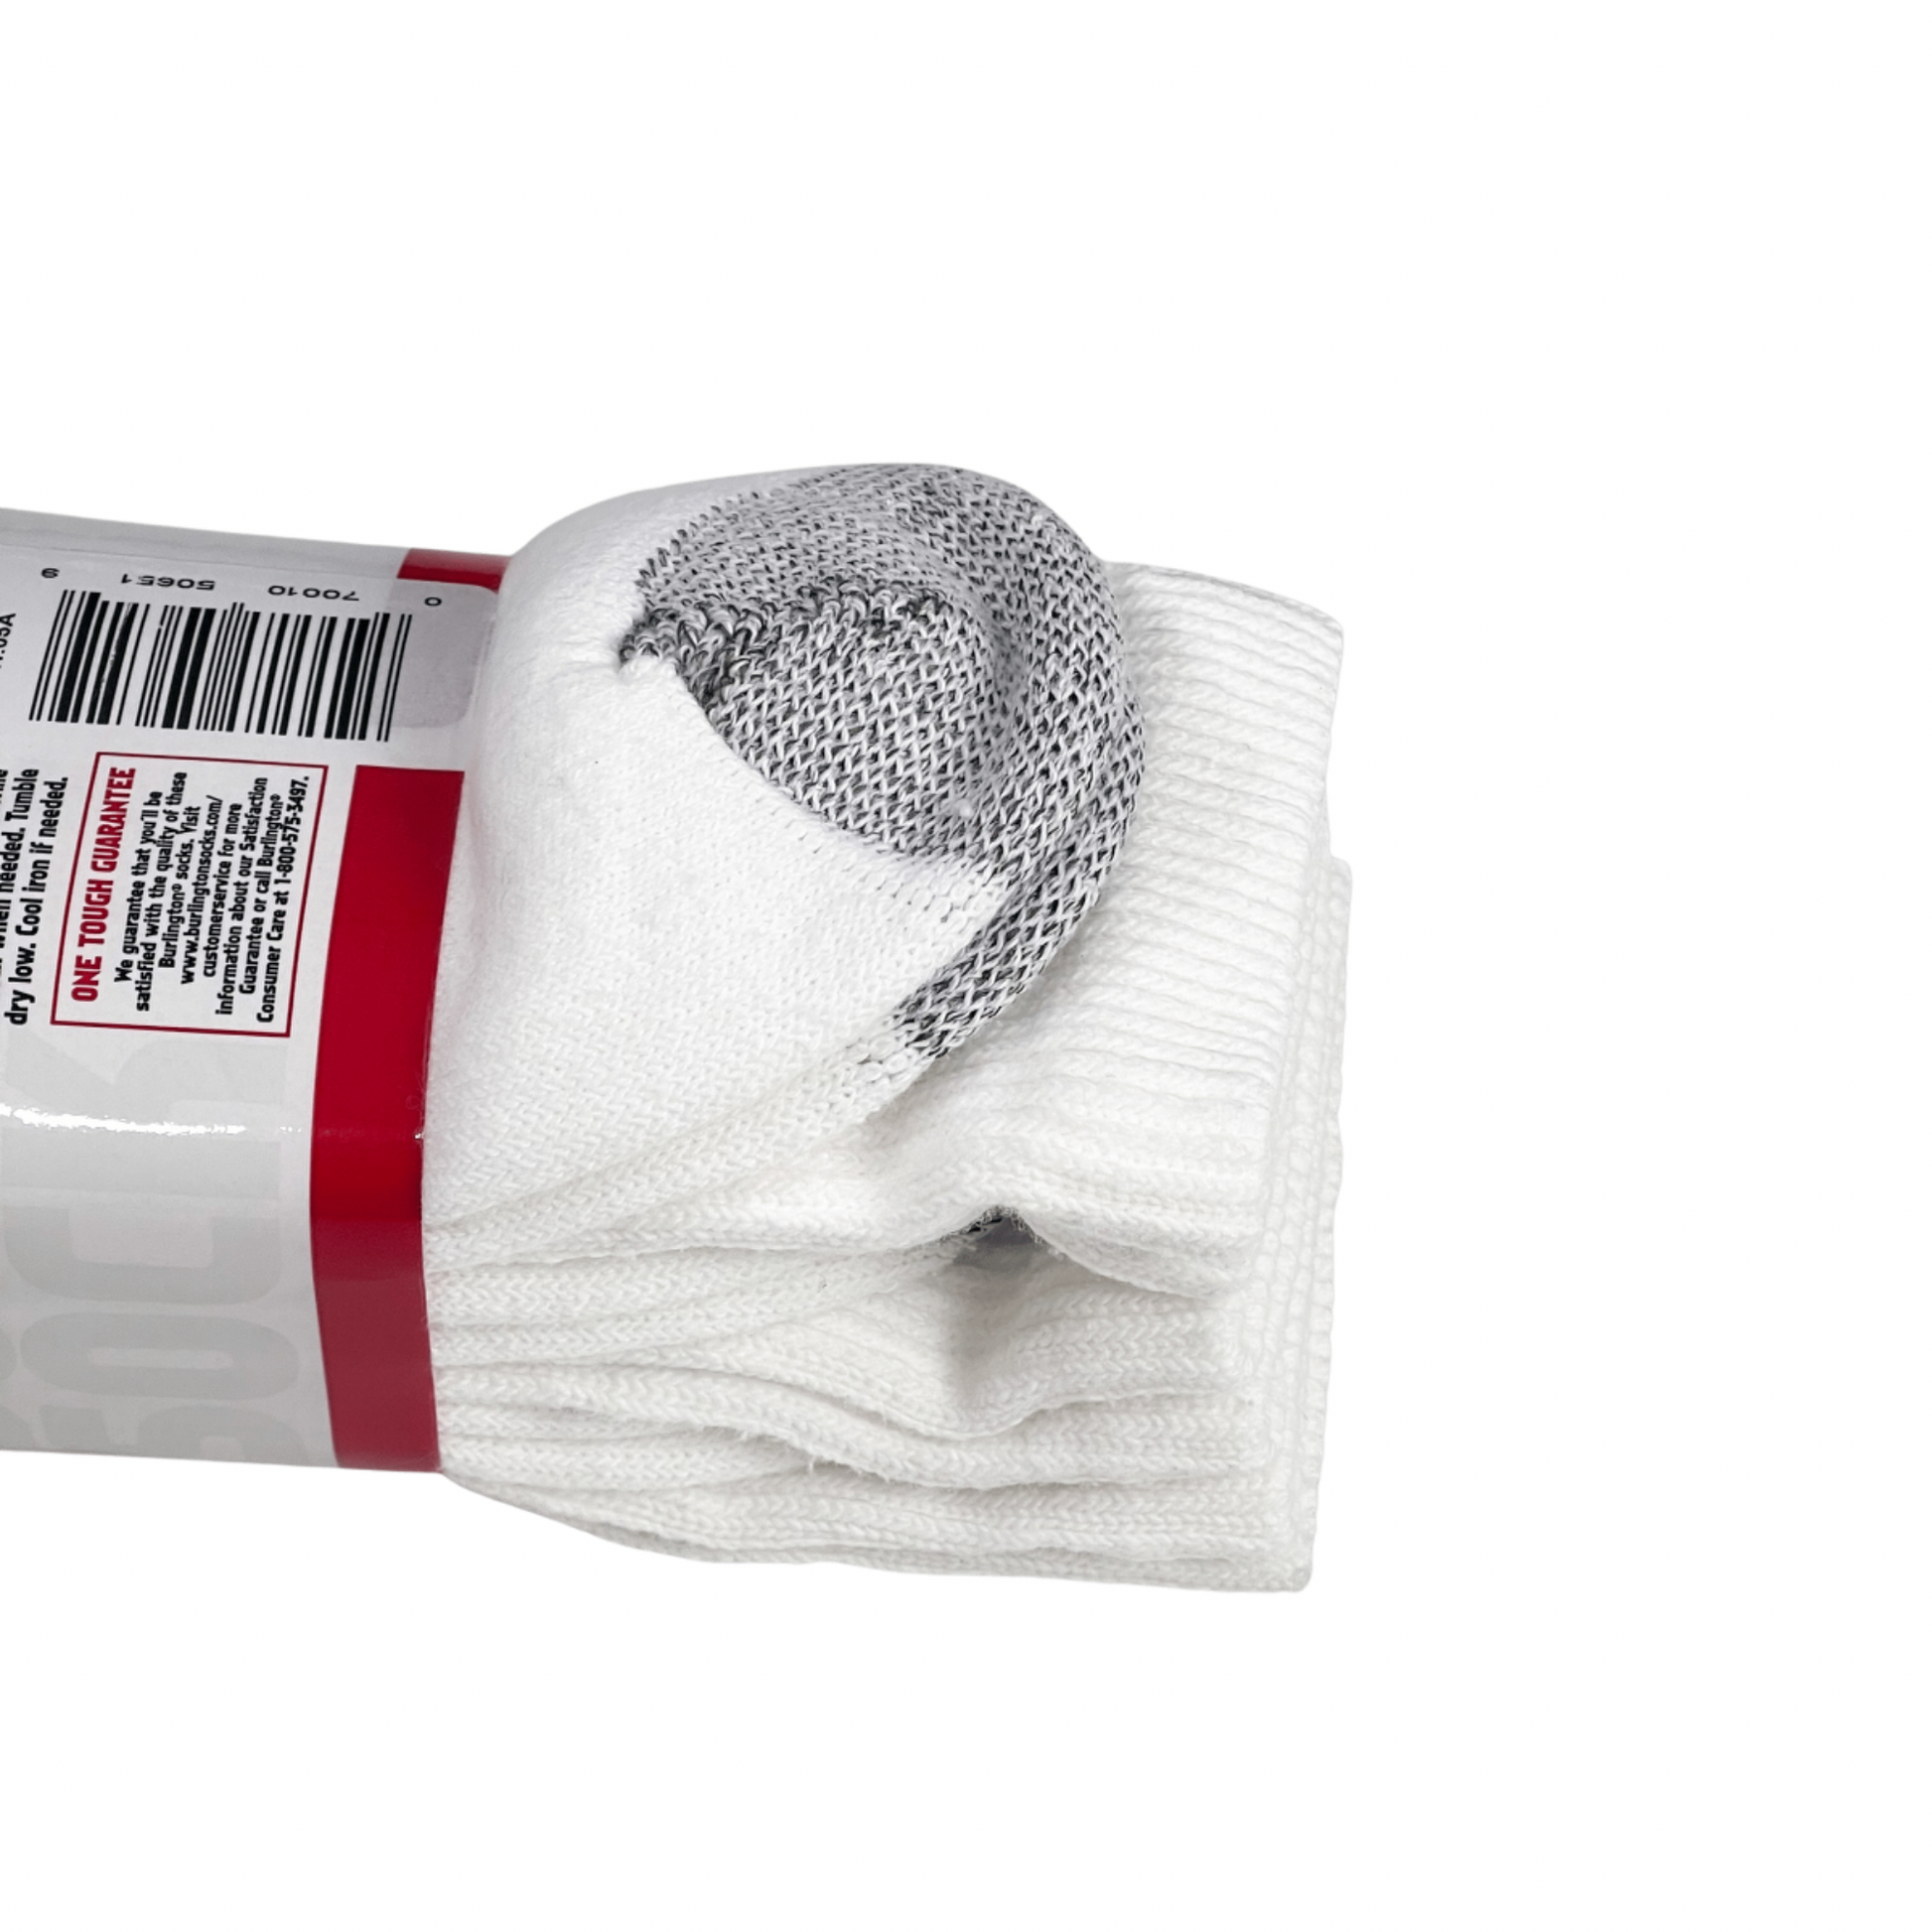 Close up on Toe: INTERWOVEN "ONE TOUGH SOCK" CASUAL COTTON CUSHION CREW - White